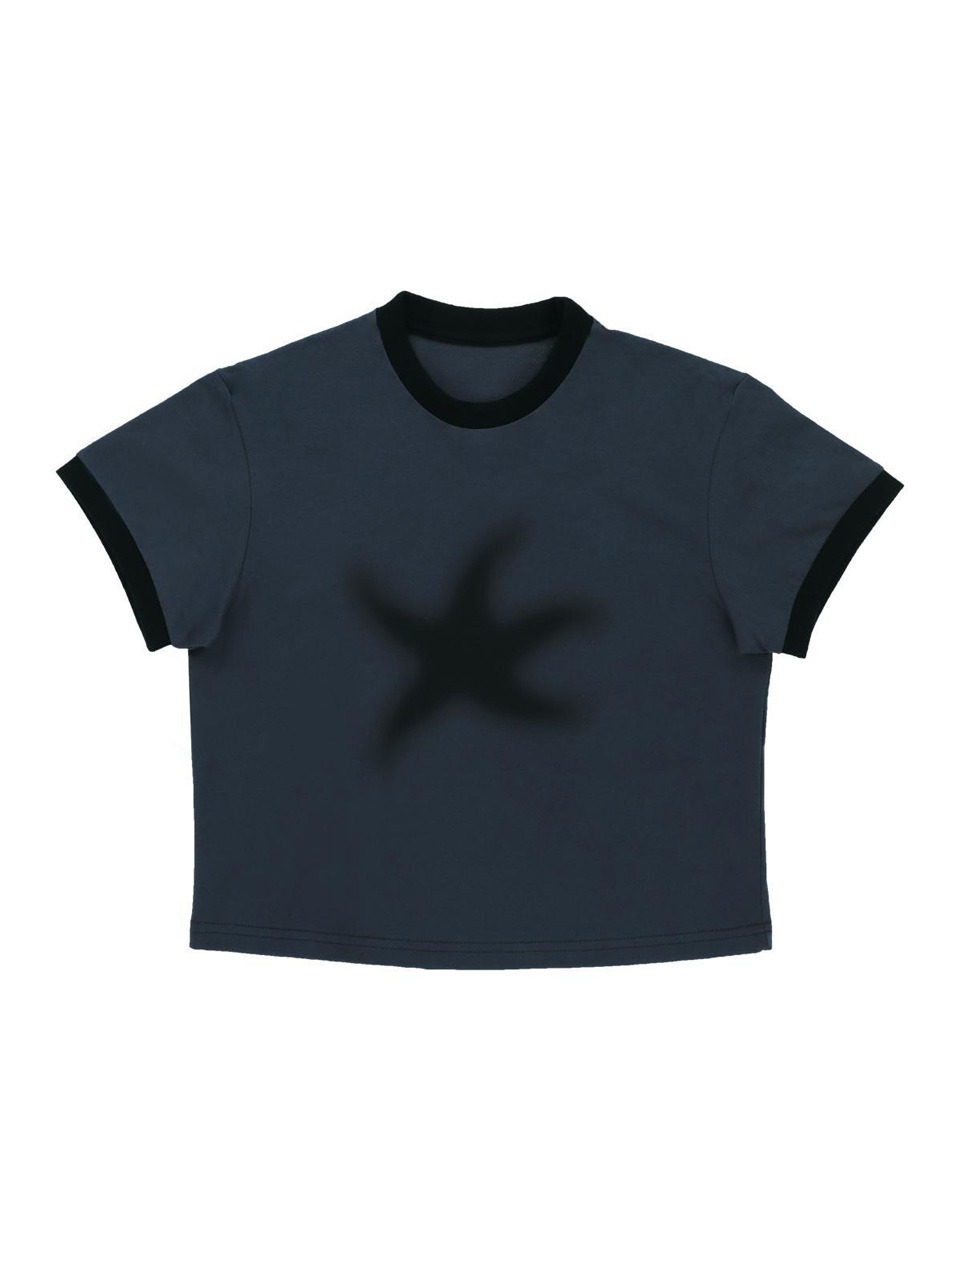 THECOLDESTMOMENT - TCM CLOUDY STARFISH RINGER T (NAVY/BLACK)